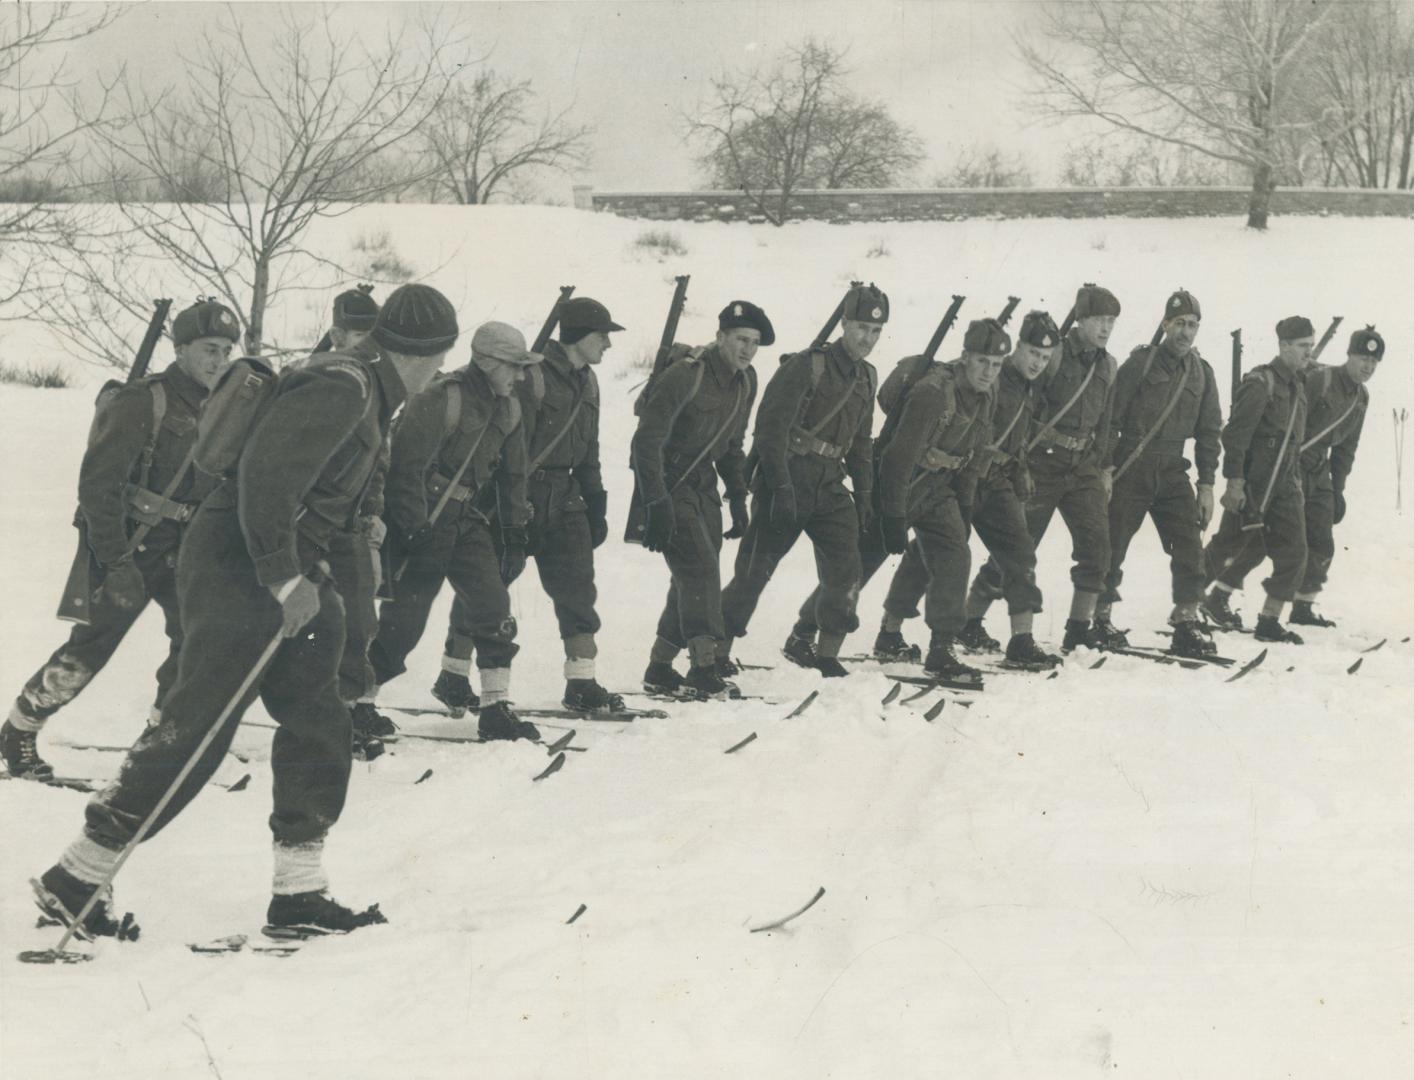 Canada's first ski school for training soldiers in the type of winter warfare waged so successfully by the Finns against the Russians has just opened (...)